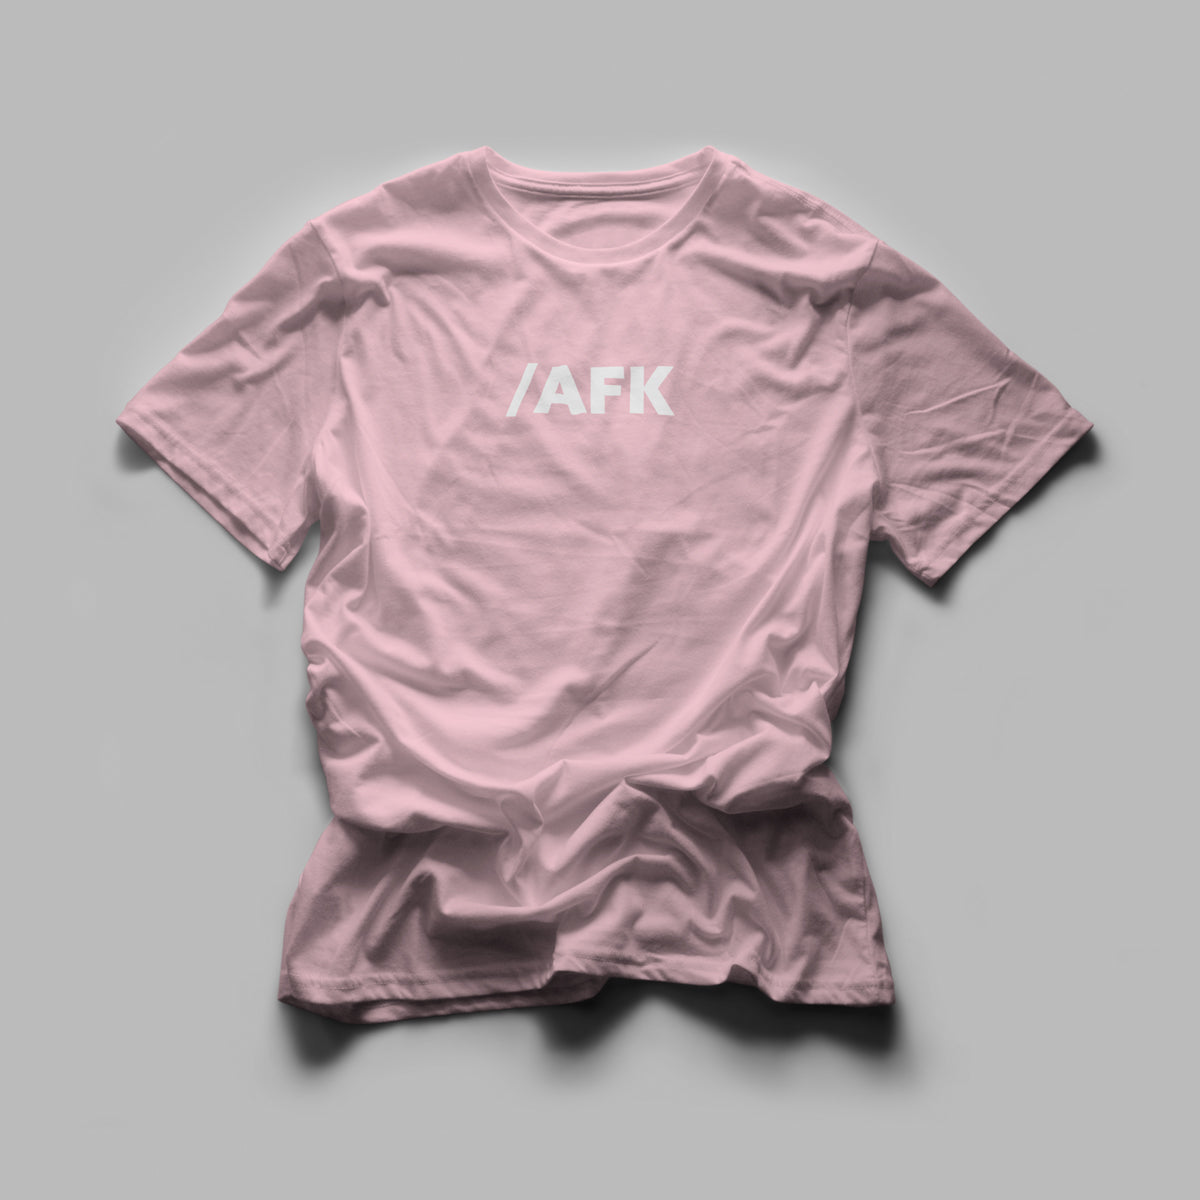 Atlas & Scout - AFK Embroidered Tee